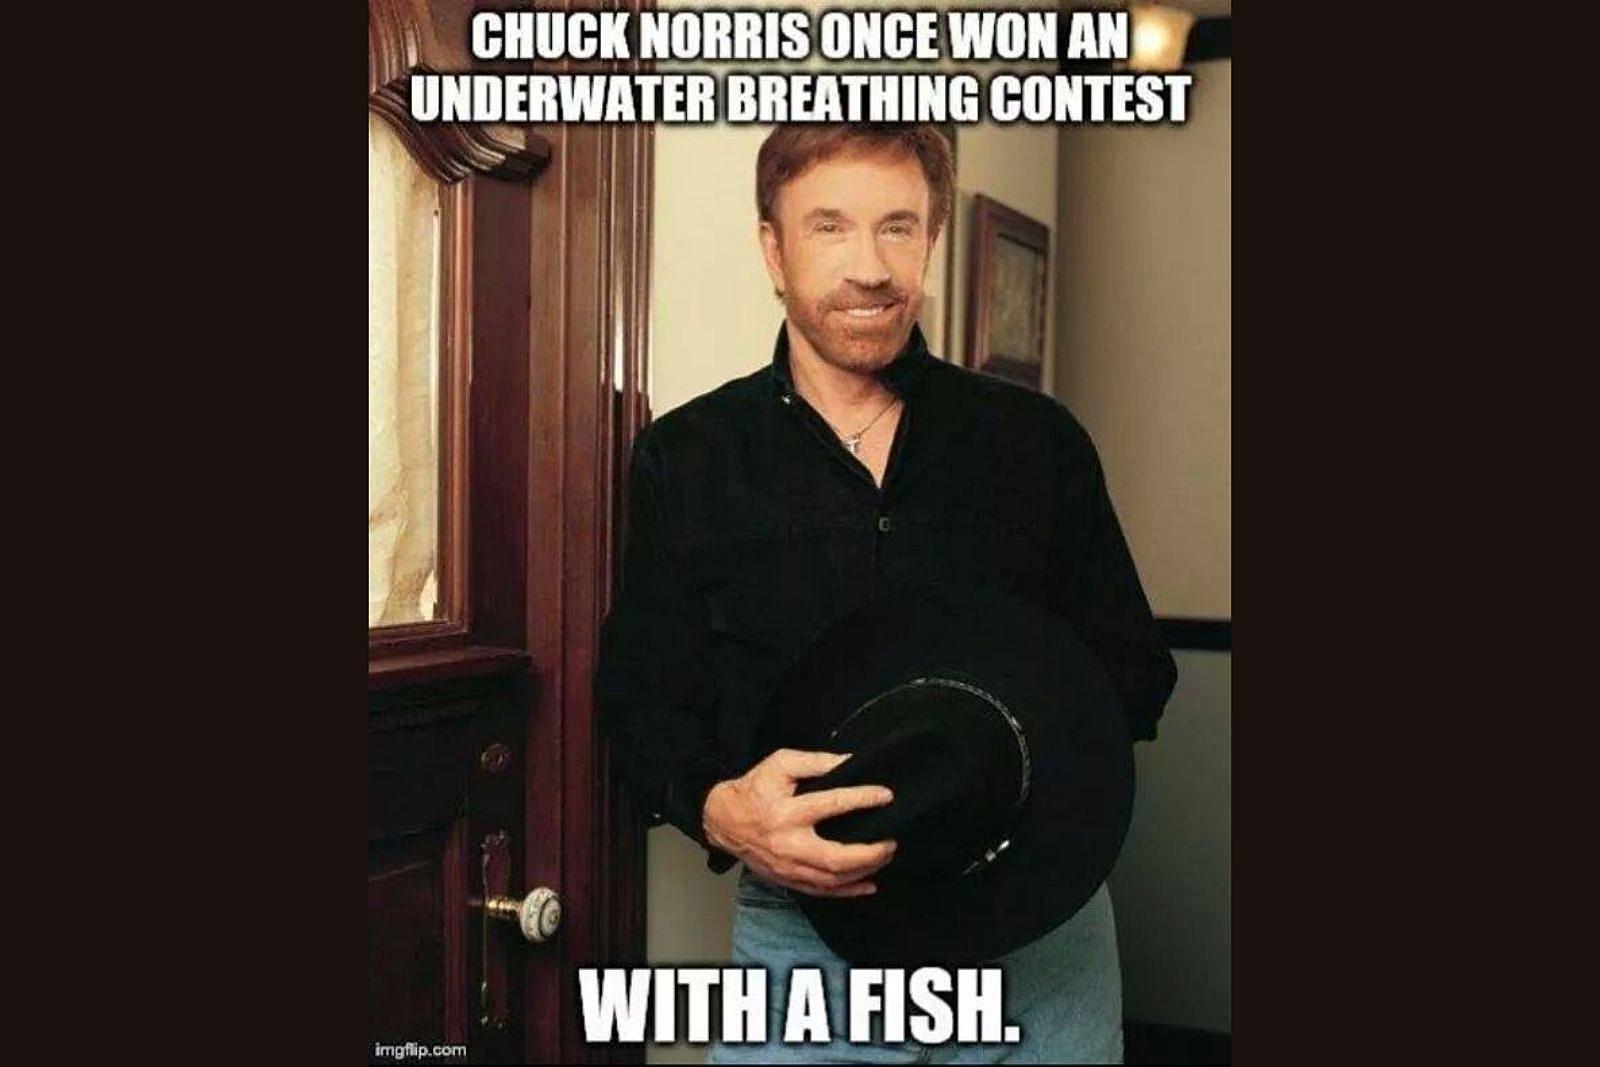 chuck norris facts 2022